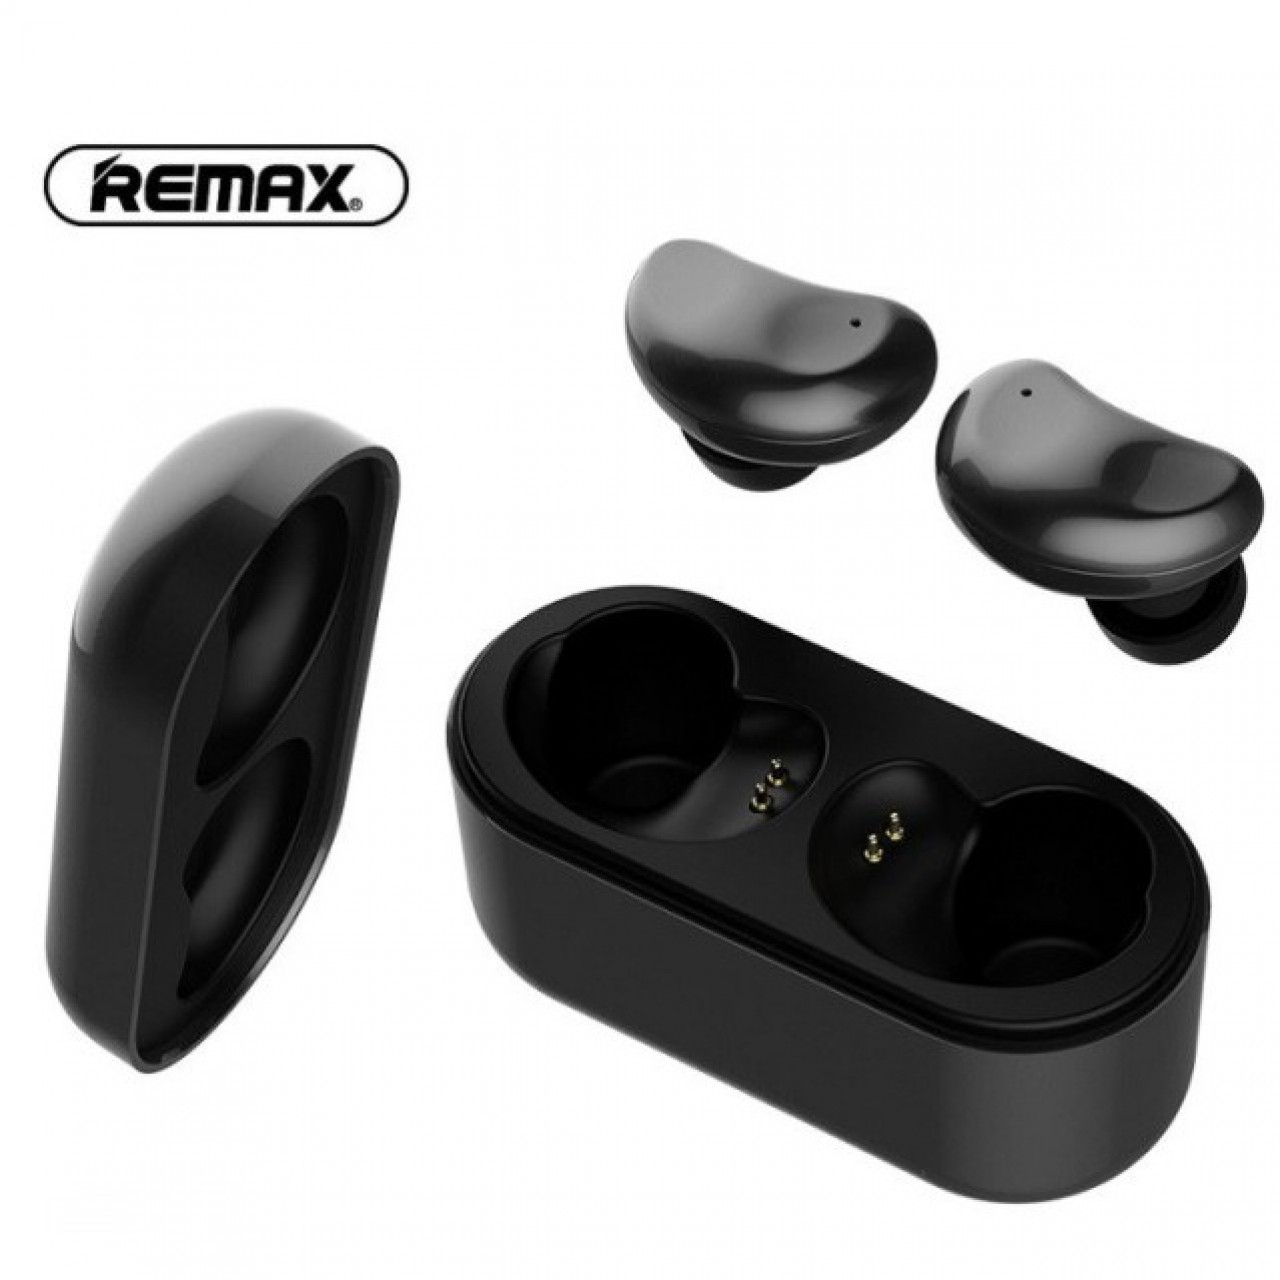 Remax TWS-5 True Wireless Stereo Earbuds With Charging Box - Black